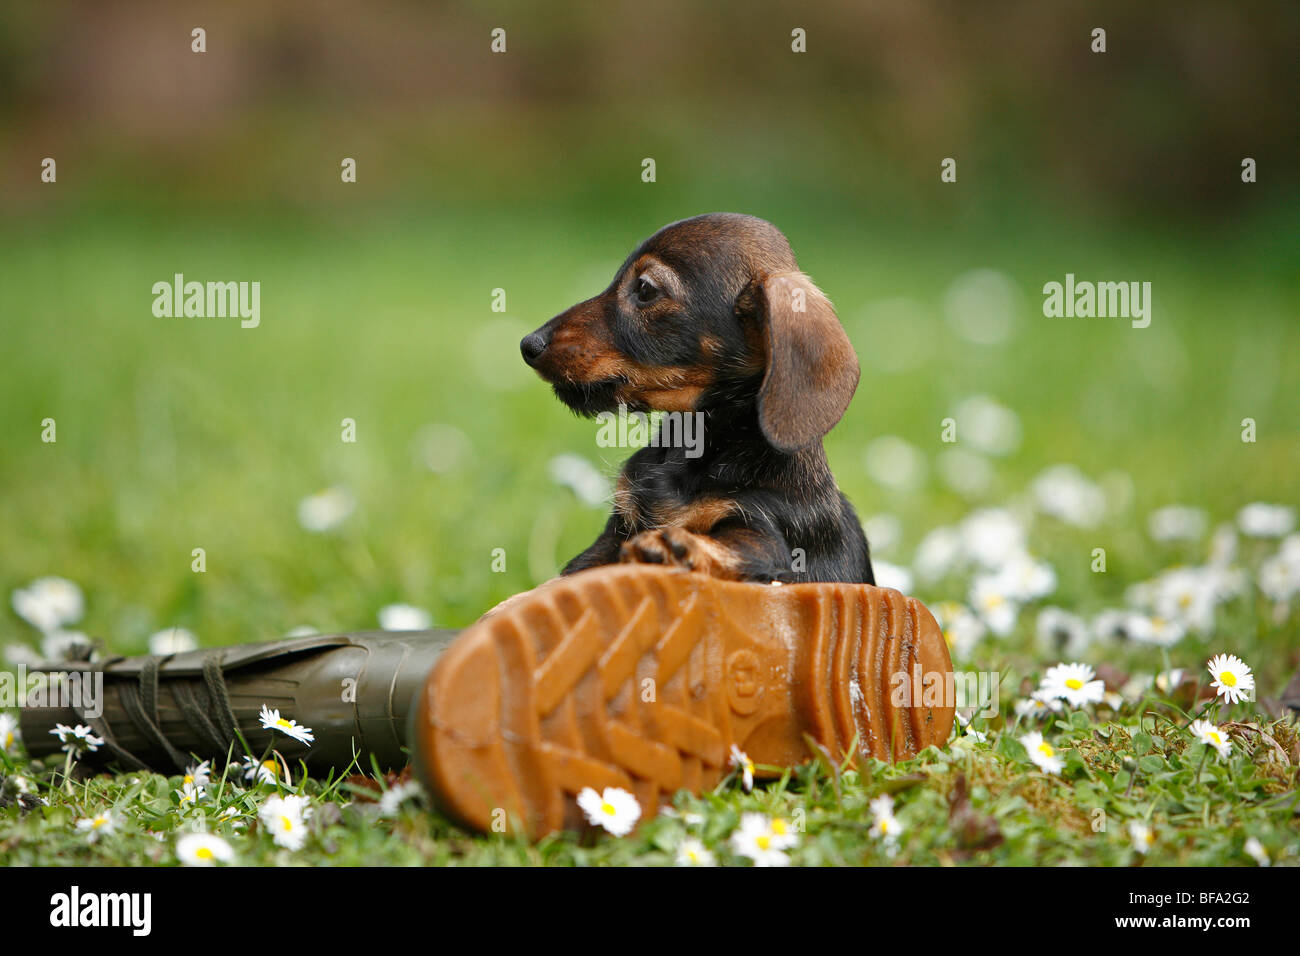 dachshund, sausage dog, domestic dog (Canis lupus f. familiaris), puppy sitting in a meadow with a rubber boot, Germany Stock Photo